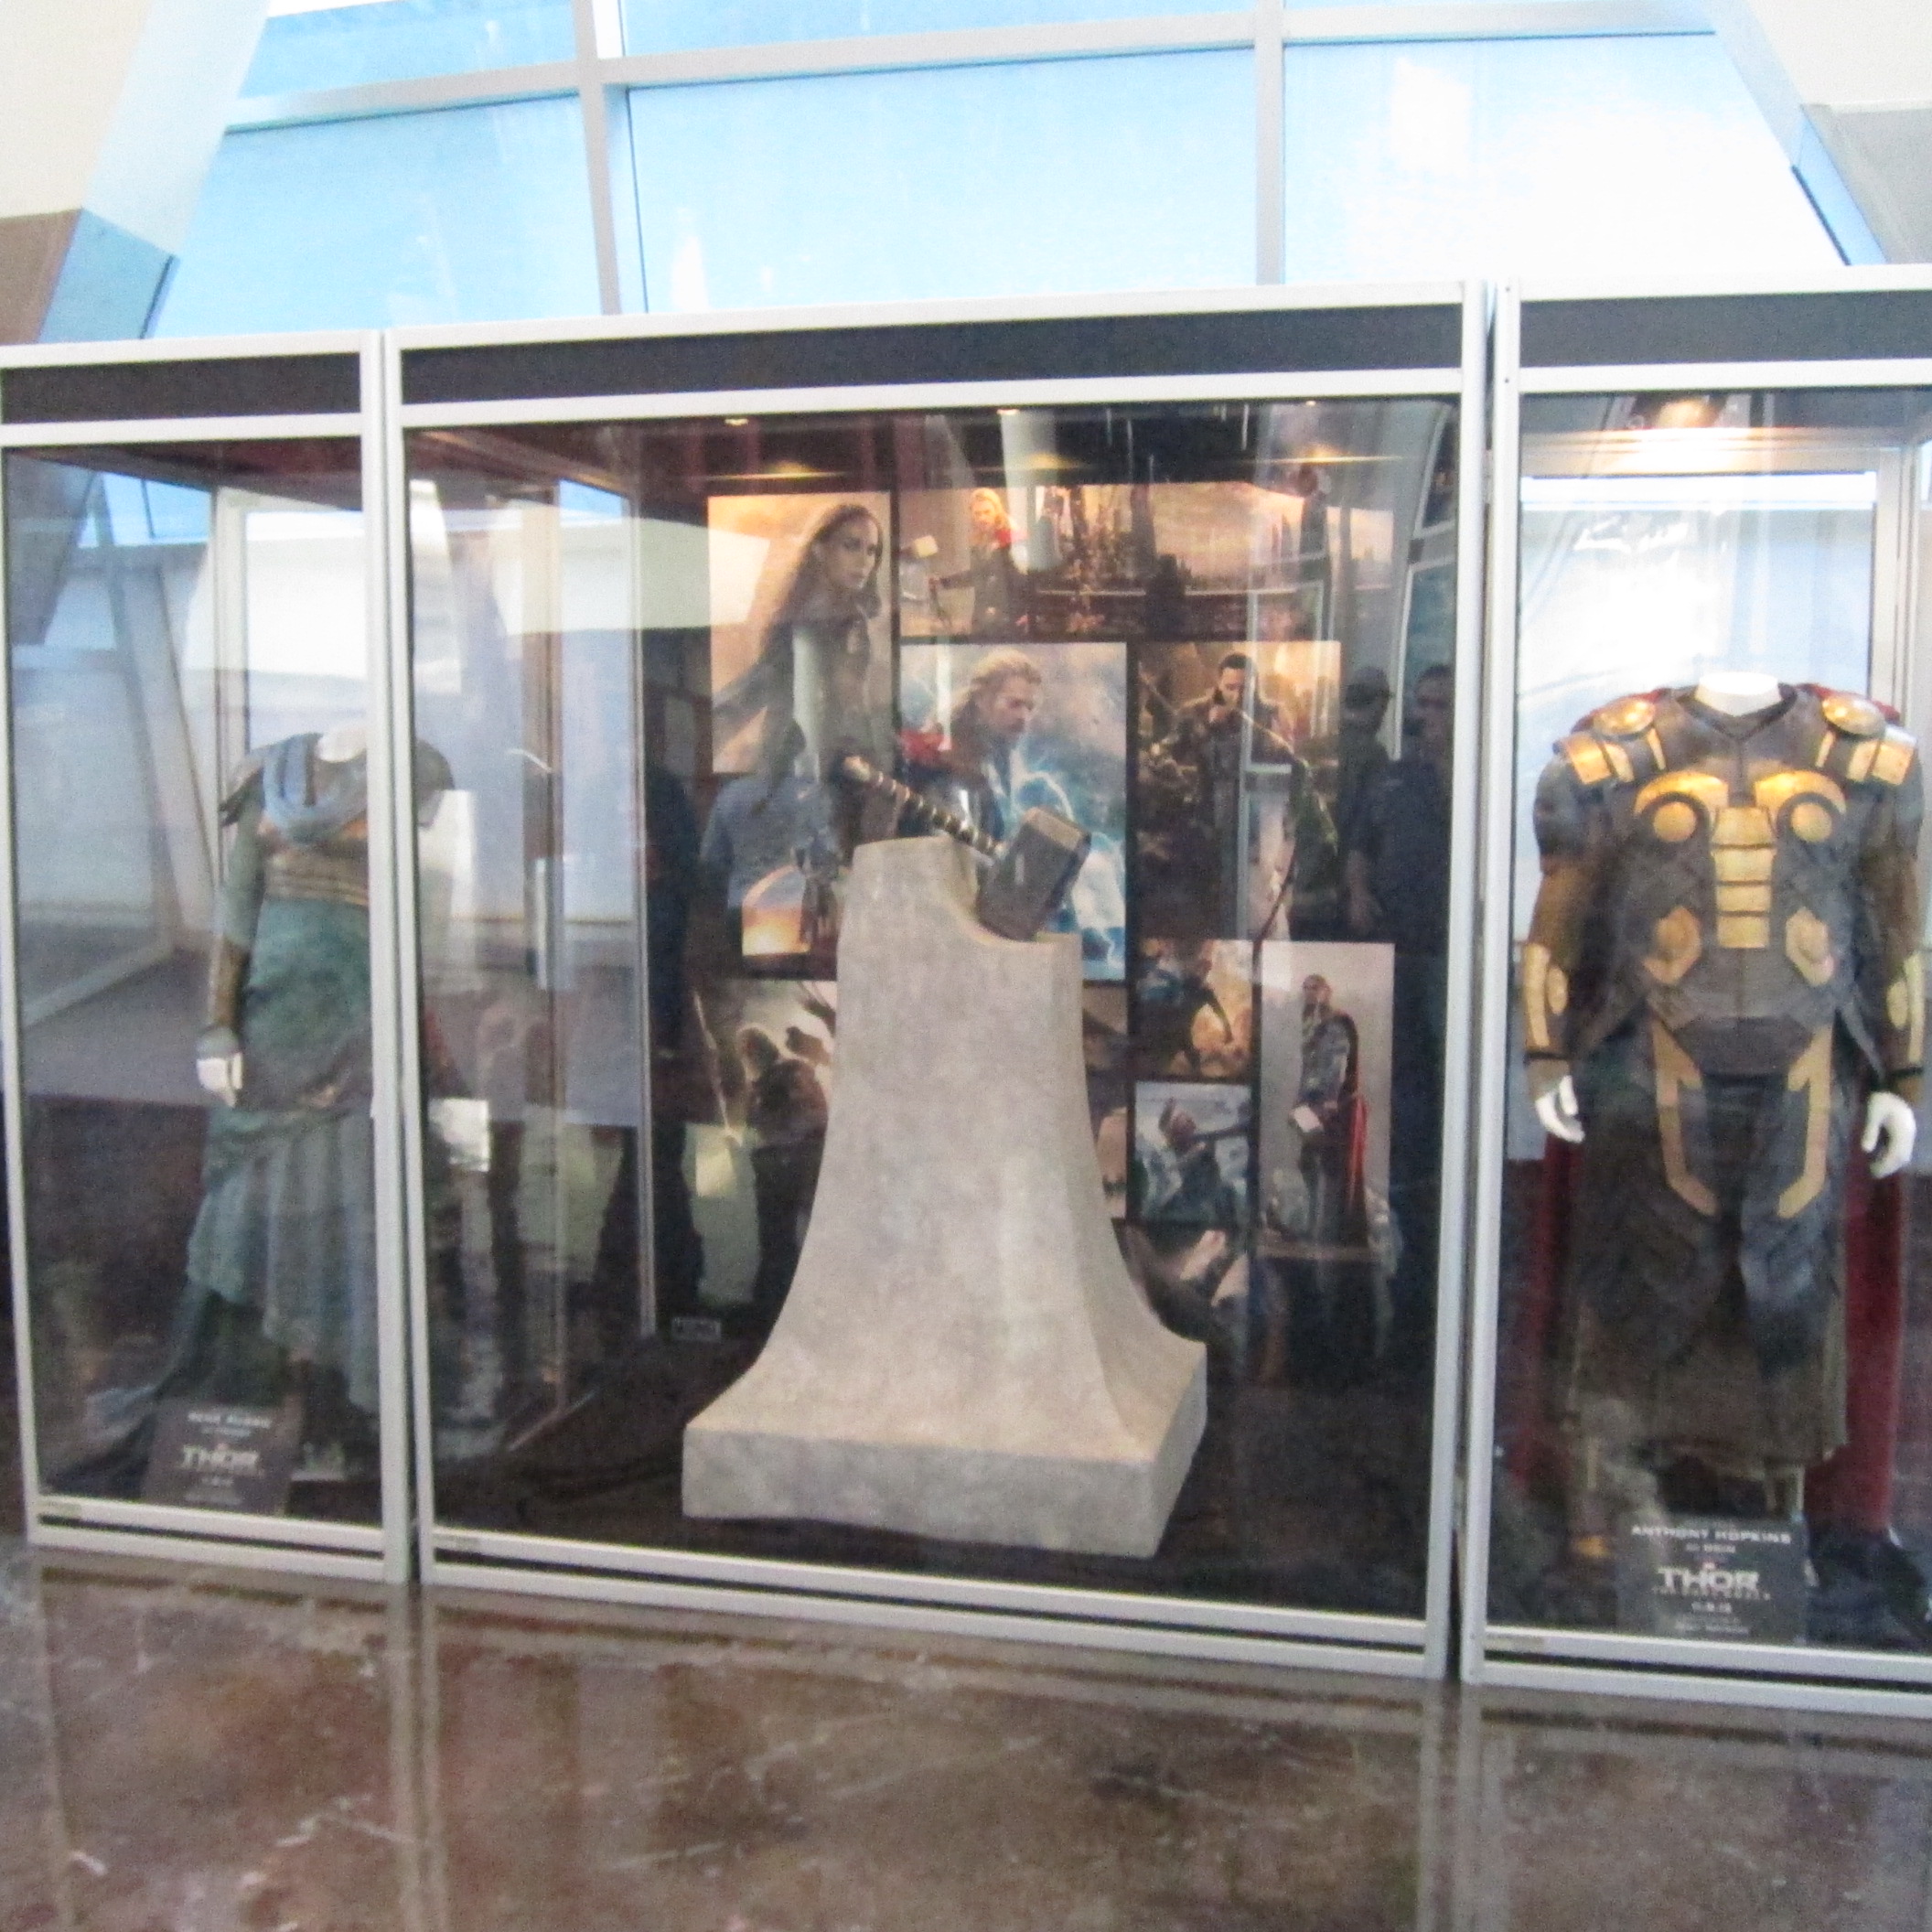 The costume & prop exhibit for THOR: THE DARK WORLD at the ArcLight Hollywood.